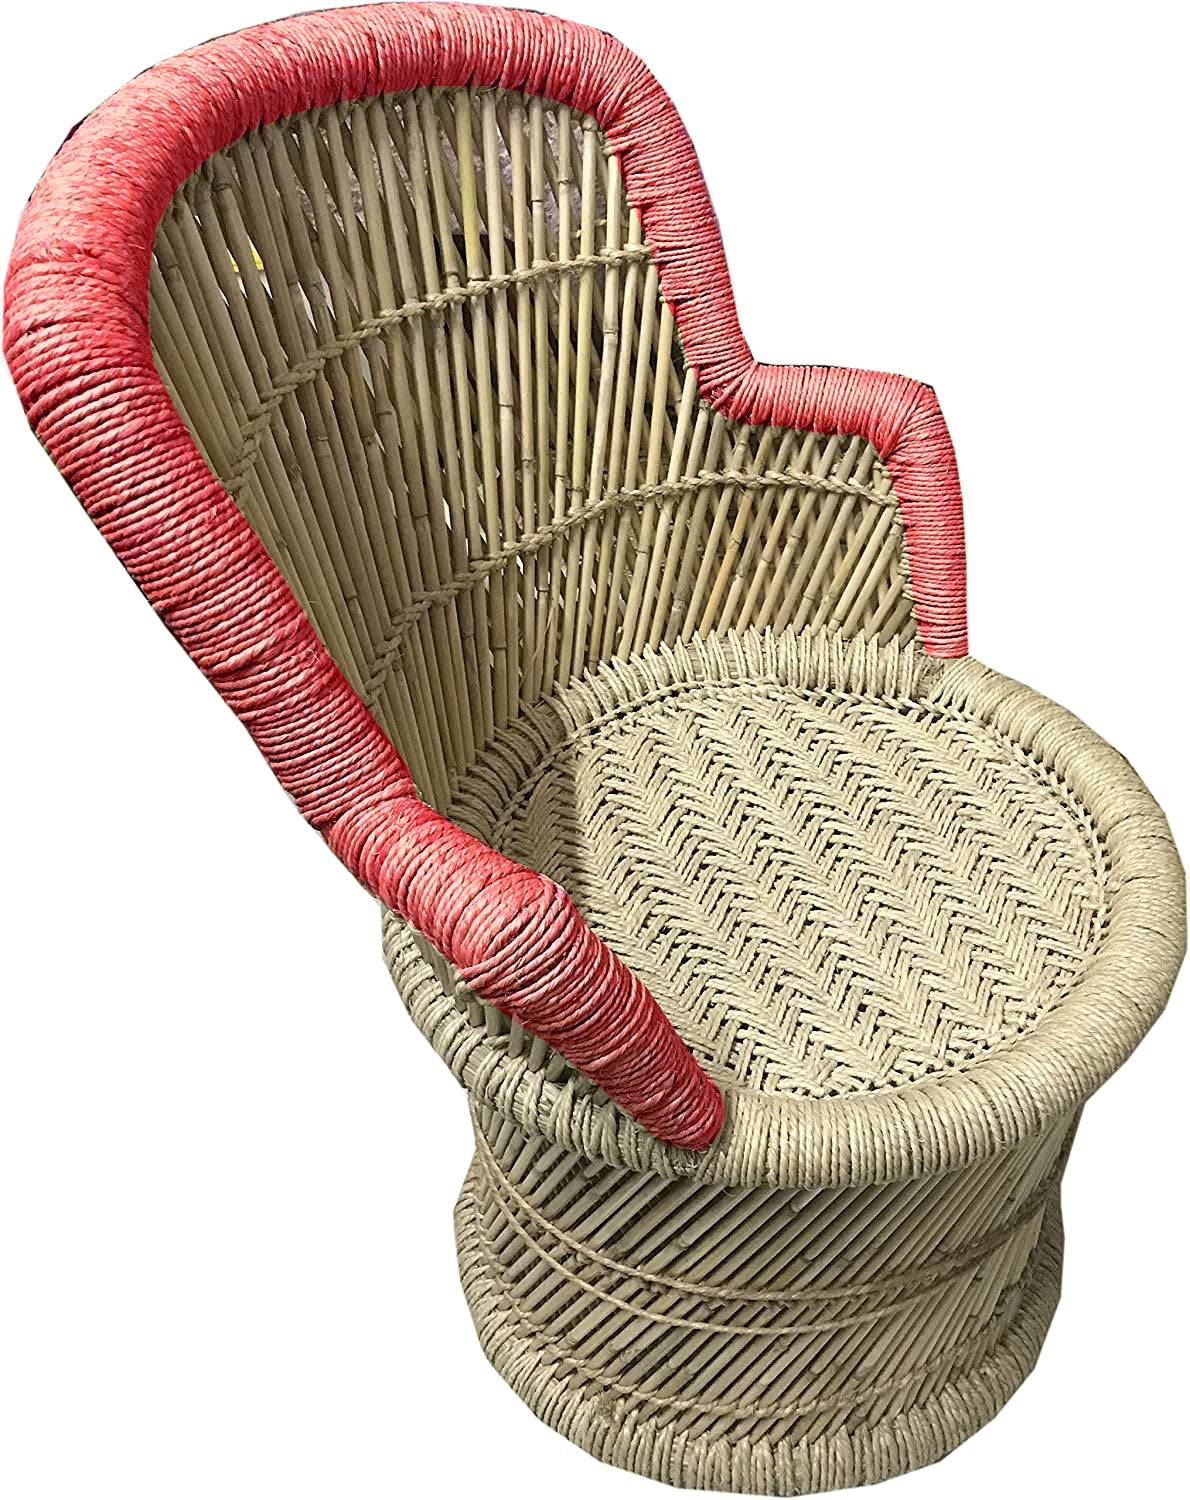 Kids Chair With Red Weaving